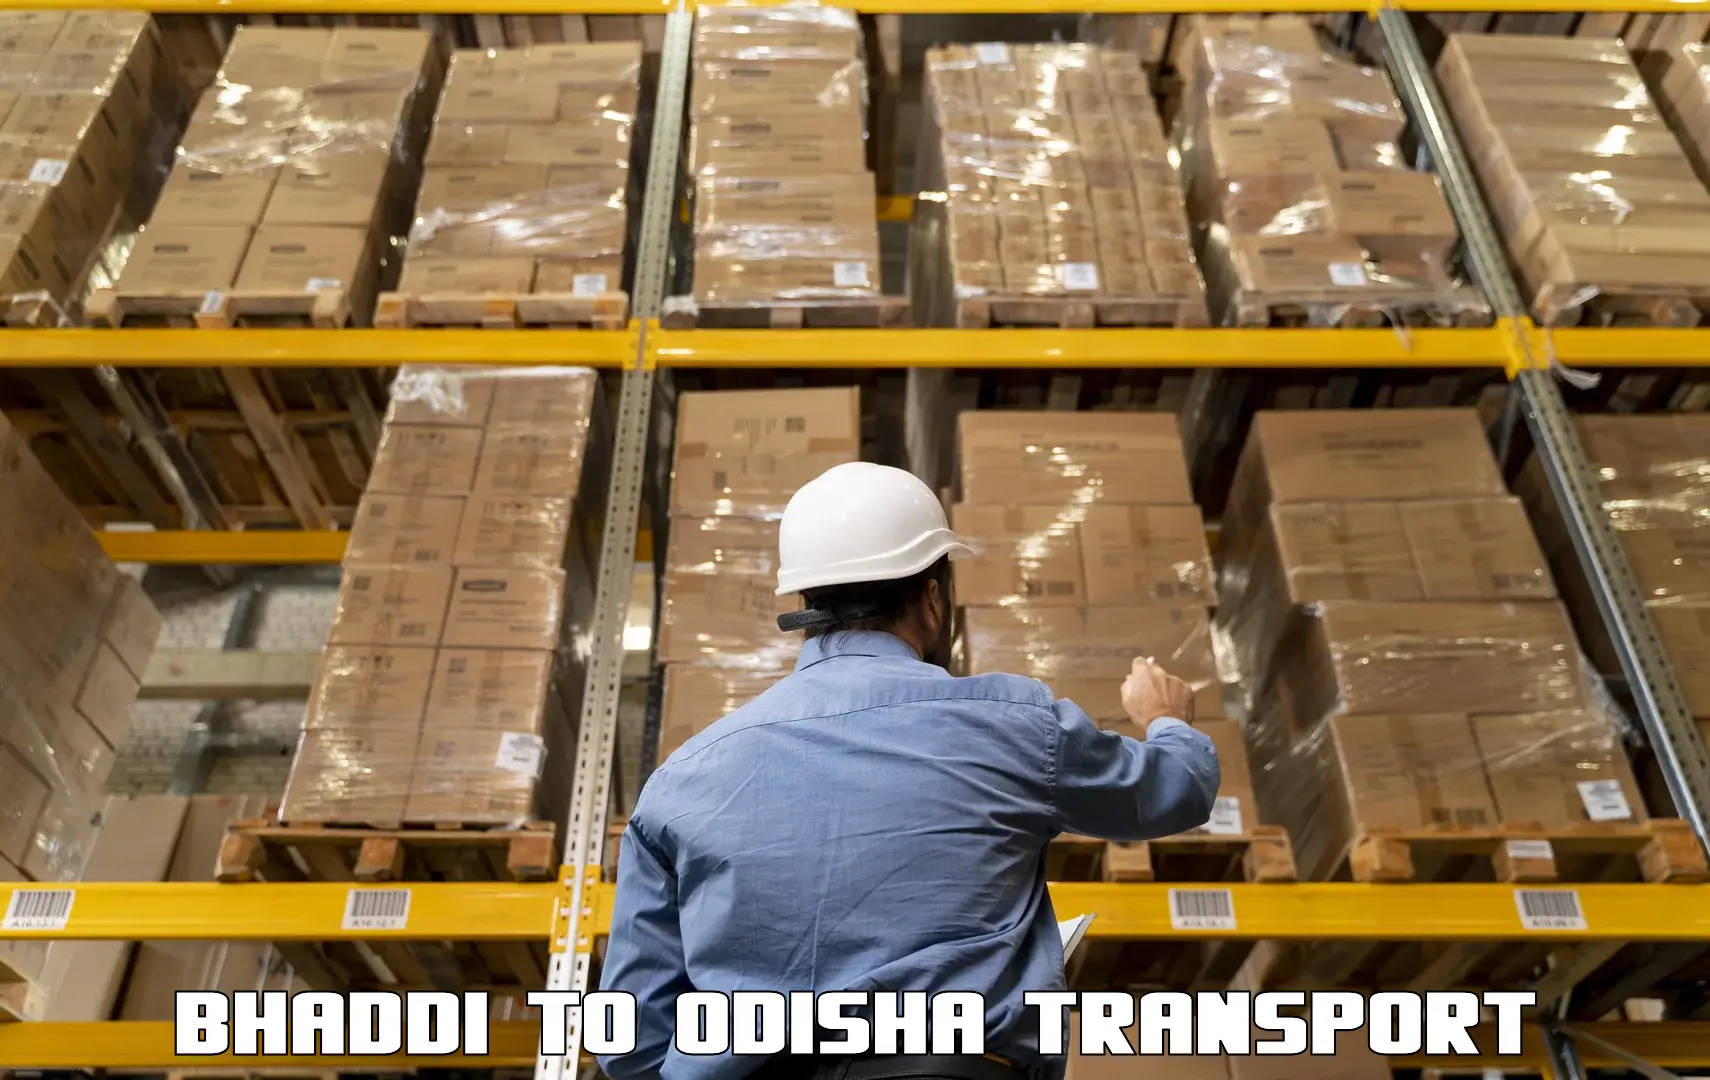 Container transport service Bhaddi to Khordha